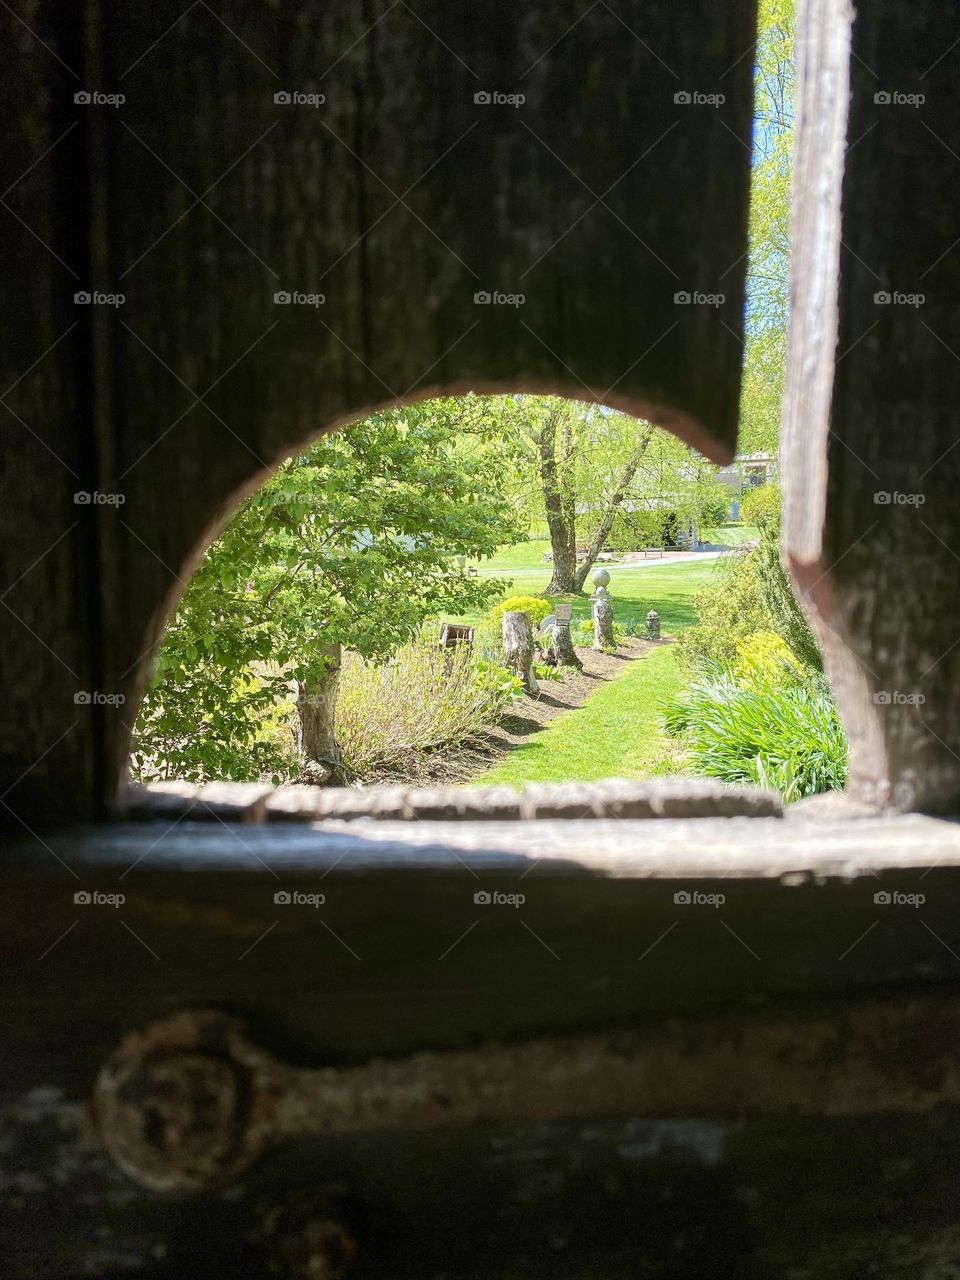 The view of a garden from a semicircular hole in a wood door